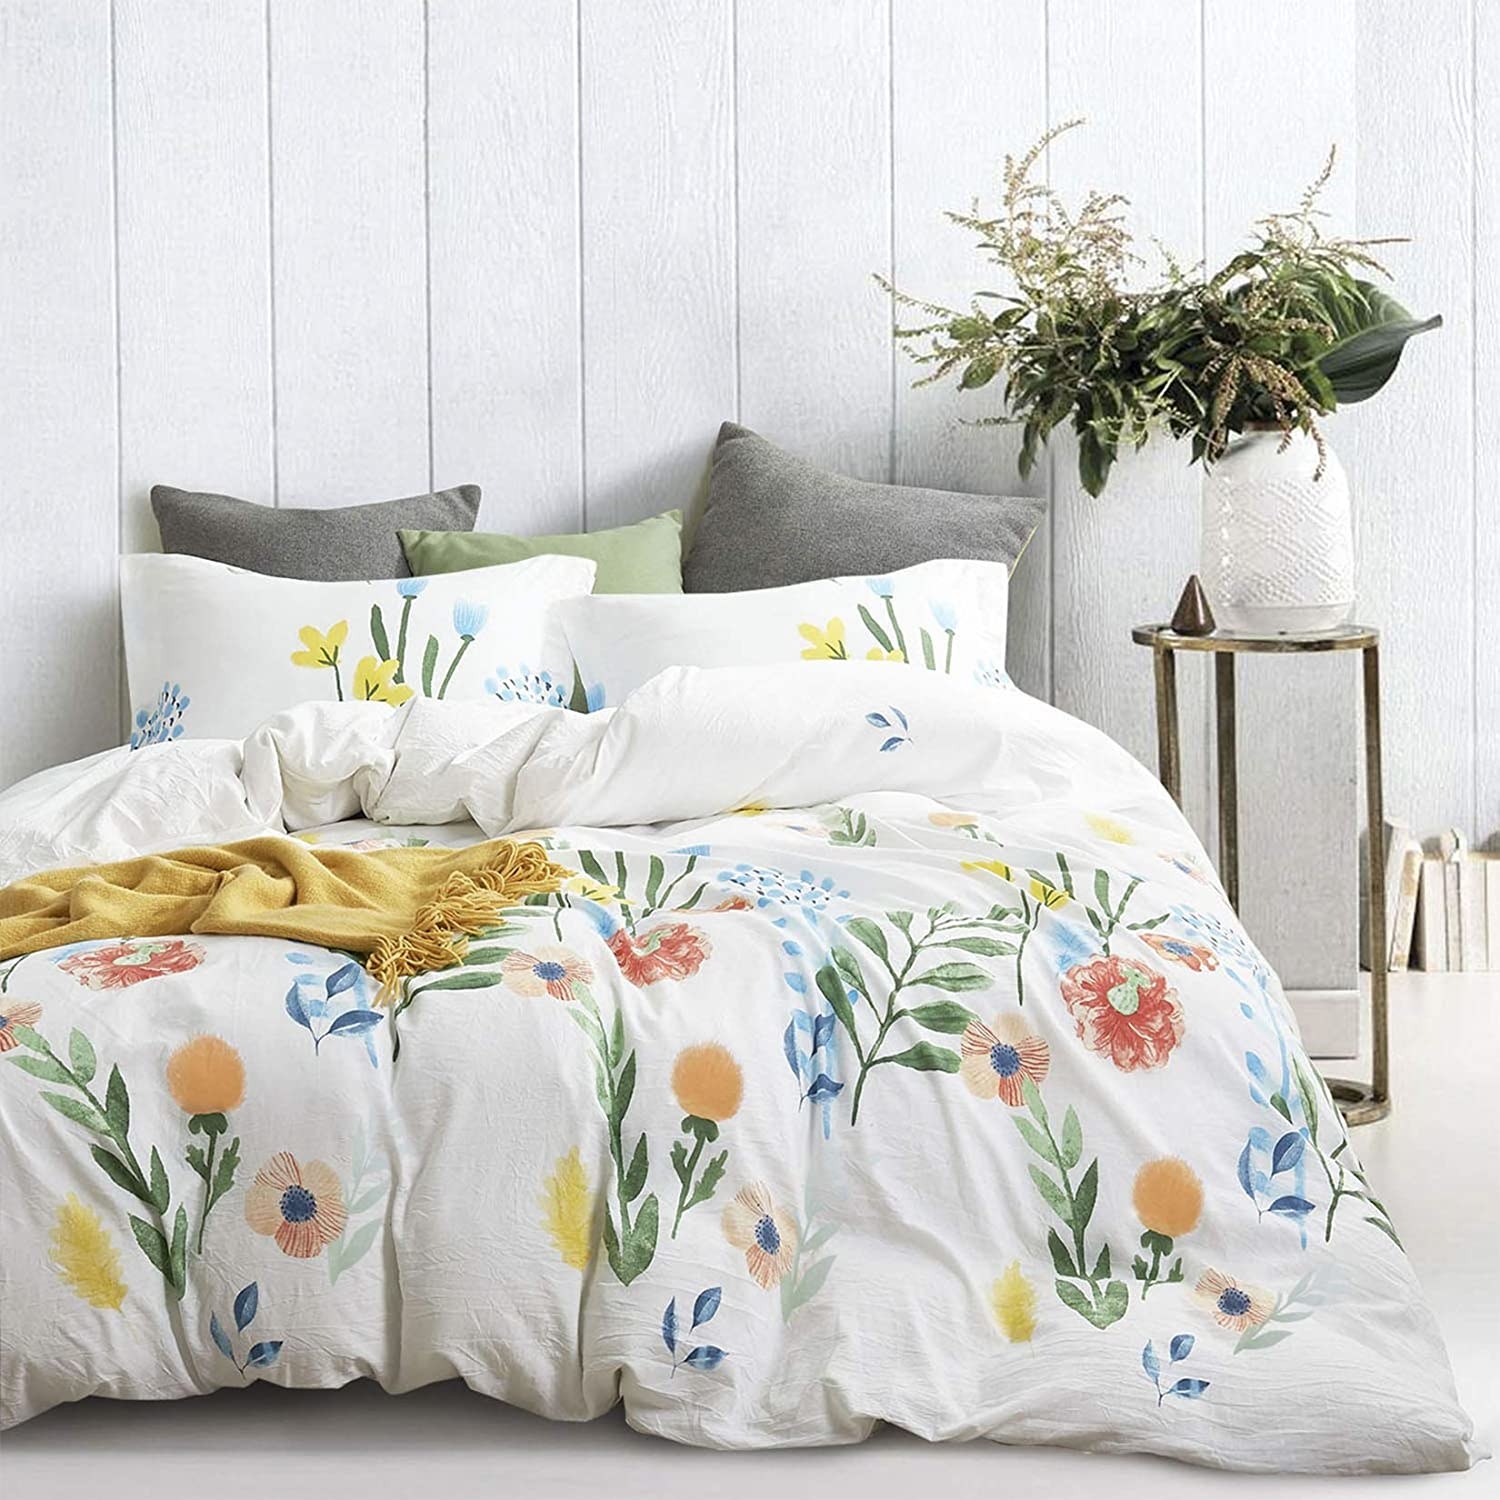 Floral bedding on a cozy bed